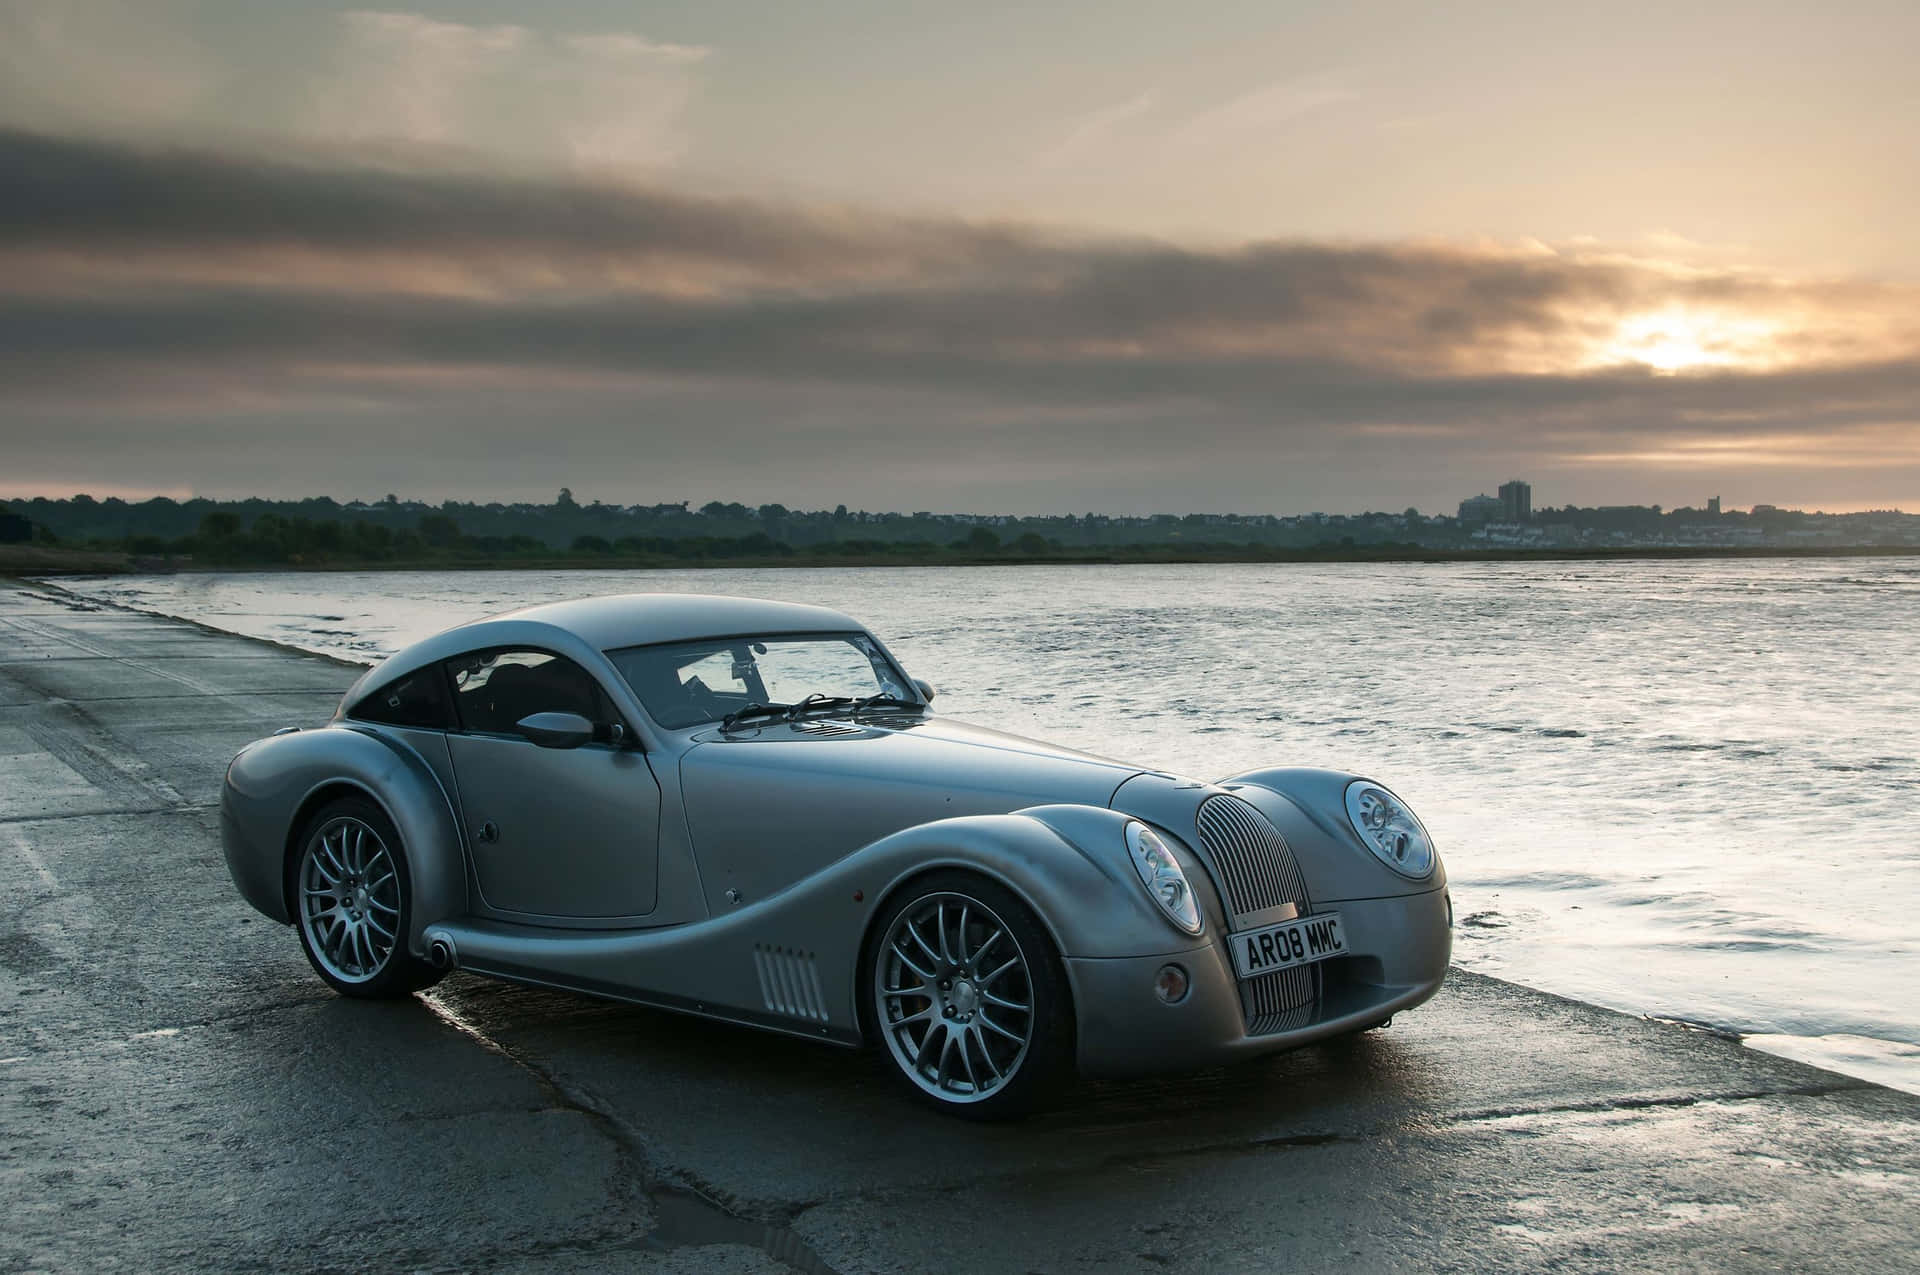 Stunning Morgan Sports Car On Scenic Road Background